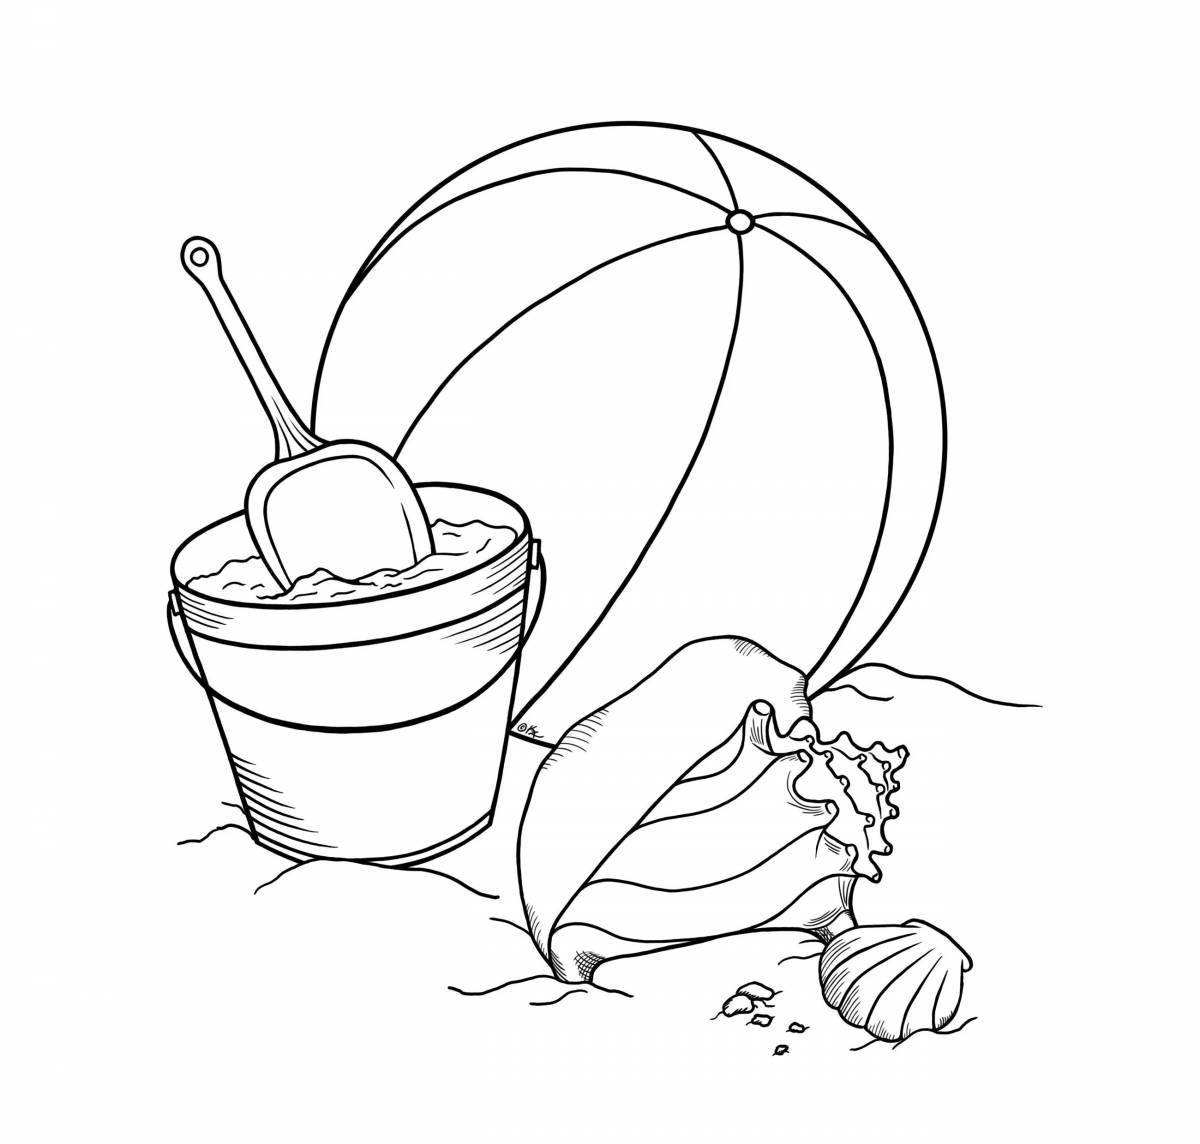 Colorful sandbox coloring page for kids